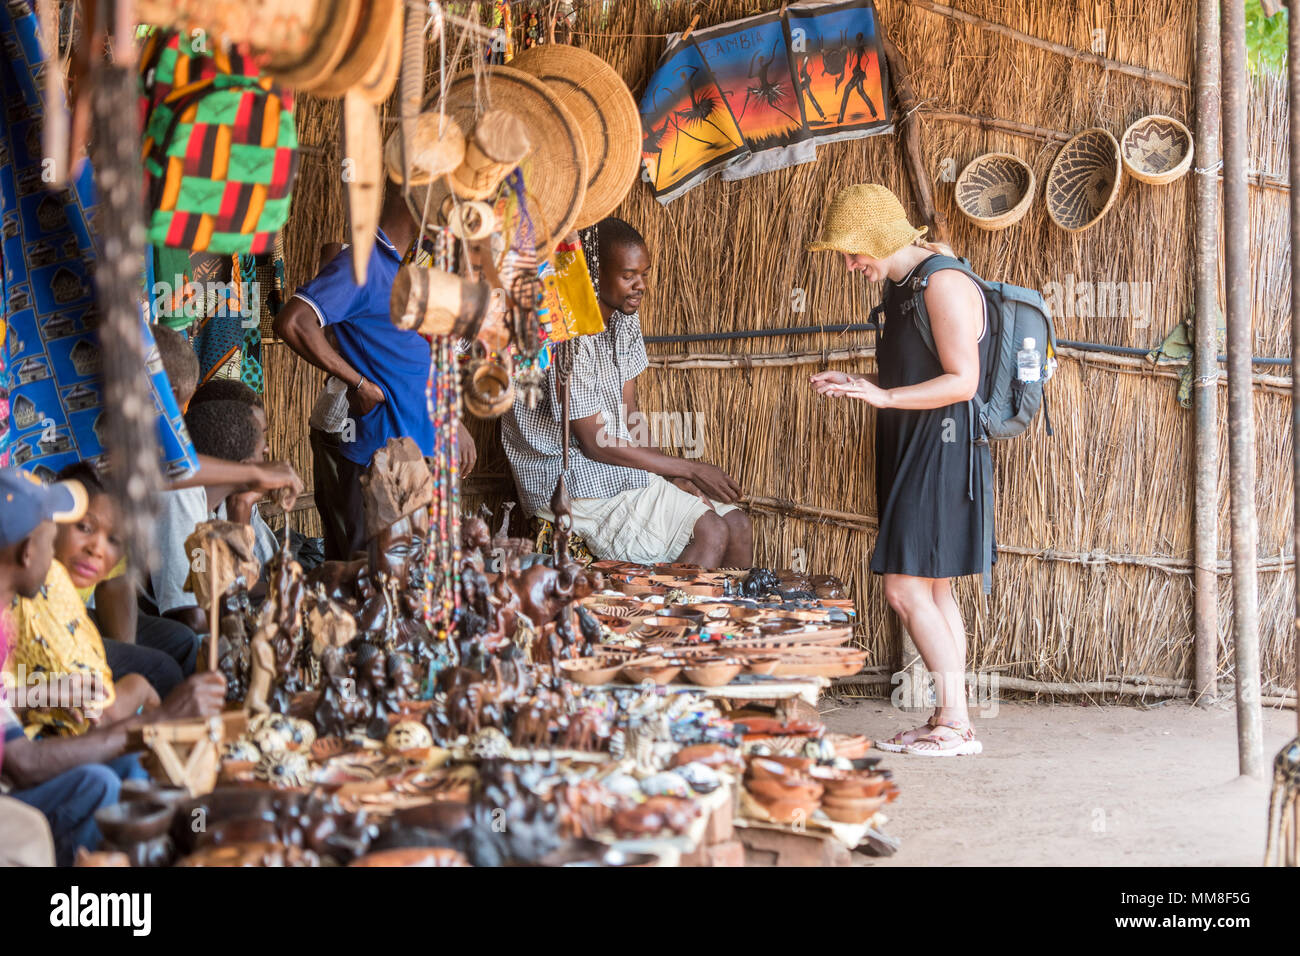 Young woman tourist browses over table full of handcrafted souvenirs while vendor assists her with purchase, Mukuni Village, Zambia Stock Photo